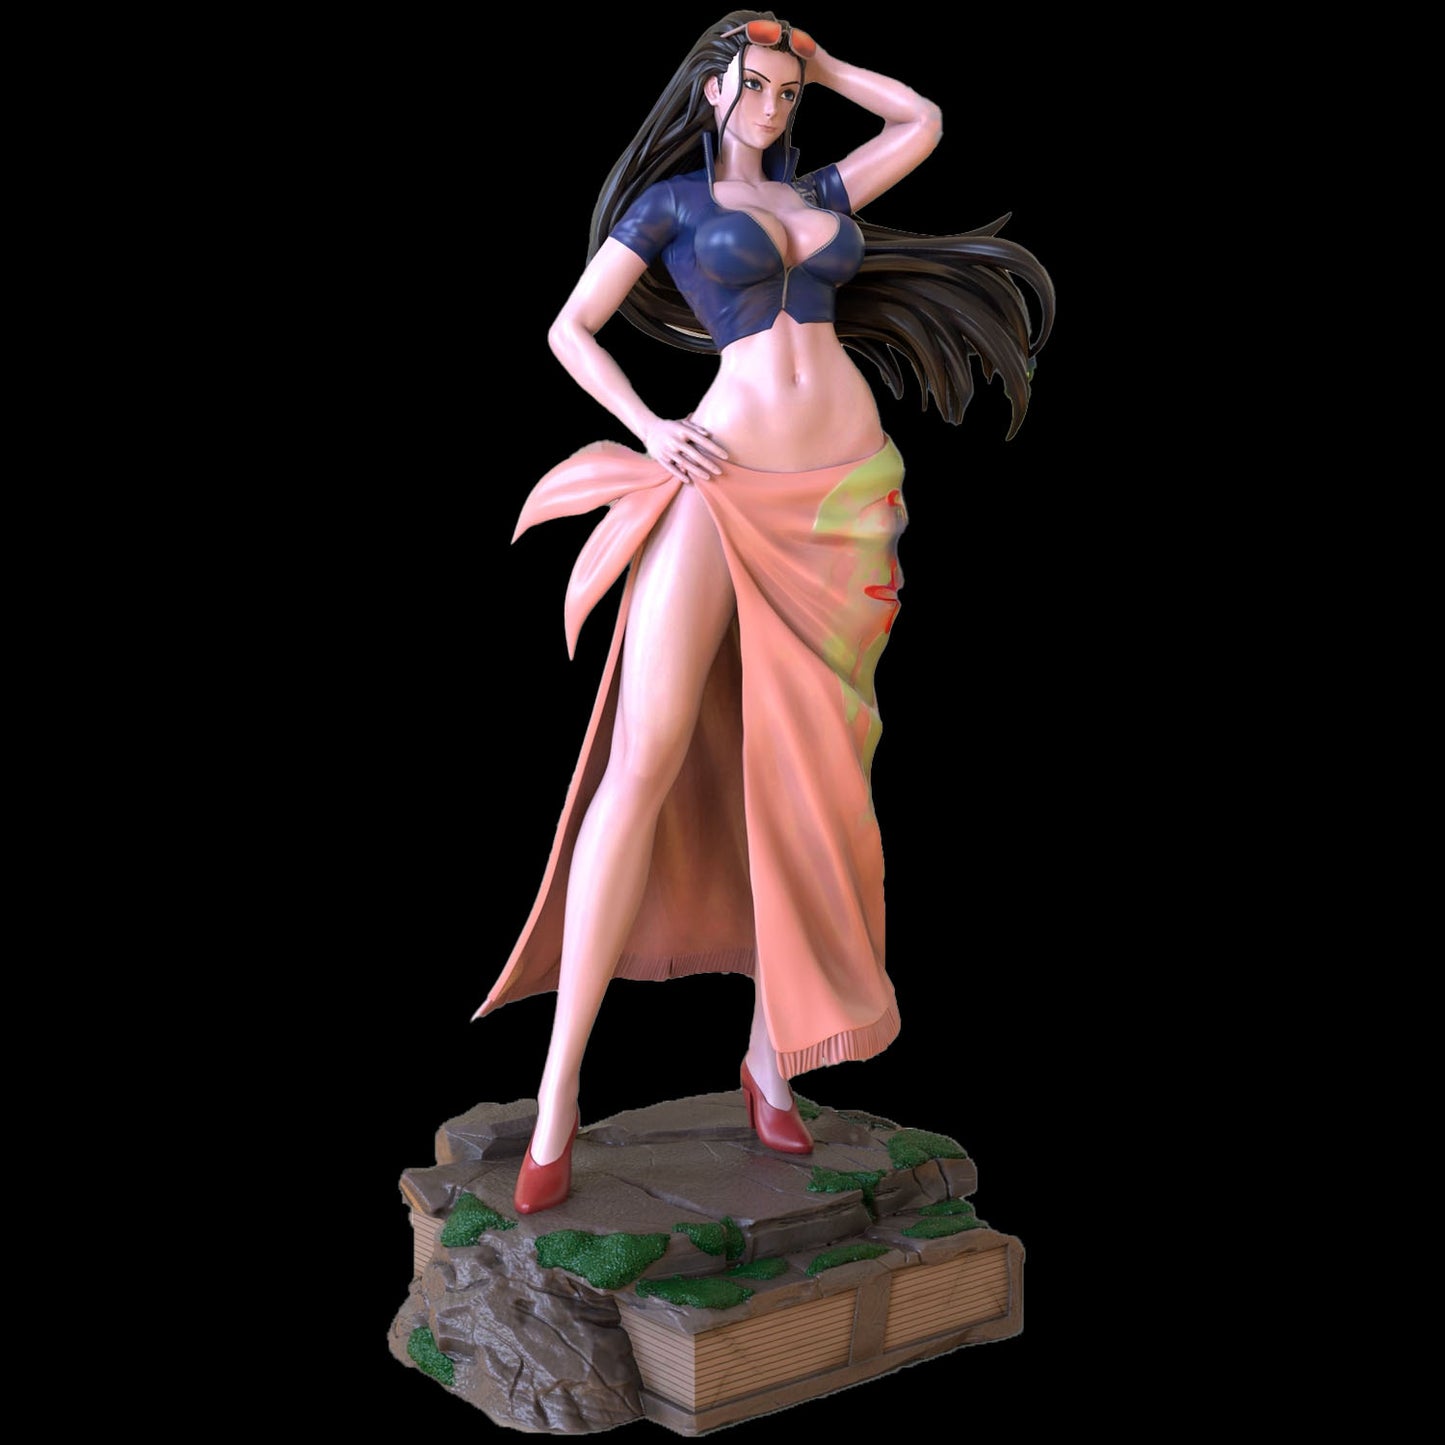 Nico Robin STL File 3D Printing Design File Anime One Piece Character 0104